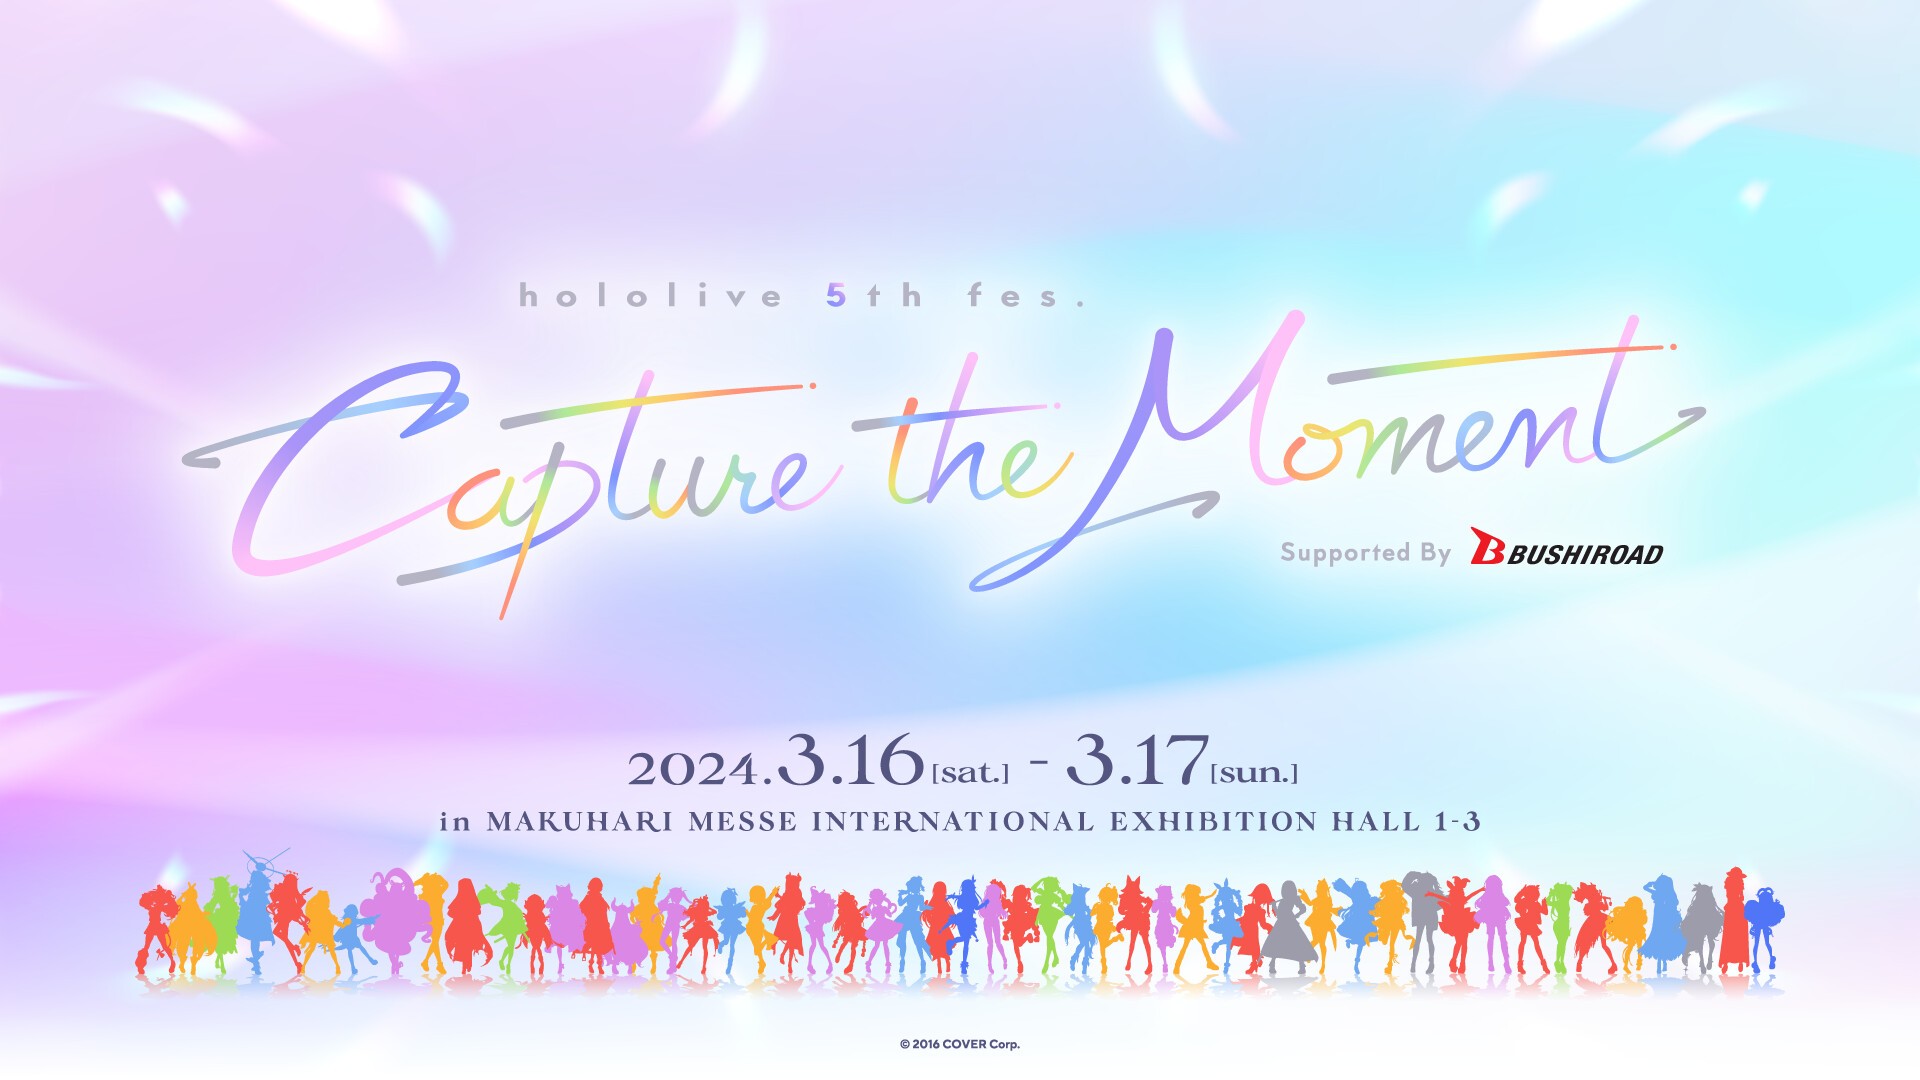 hololive 5th fes. Capture the Moment Supported By Bushiroad | Zaiko